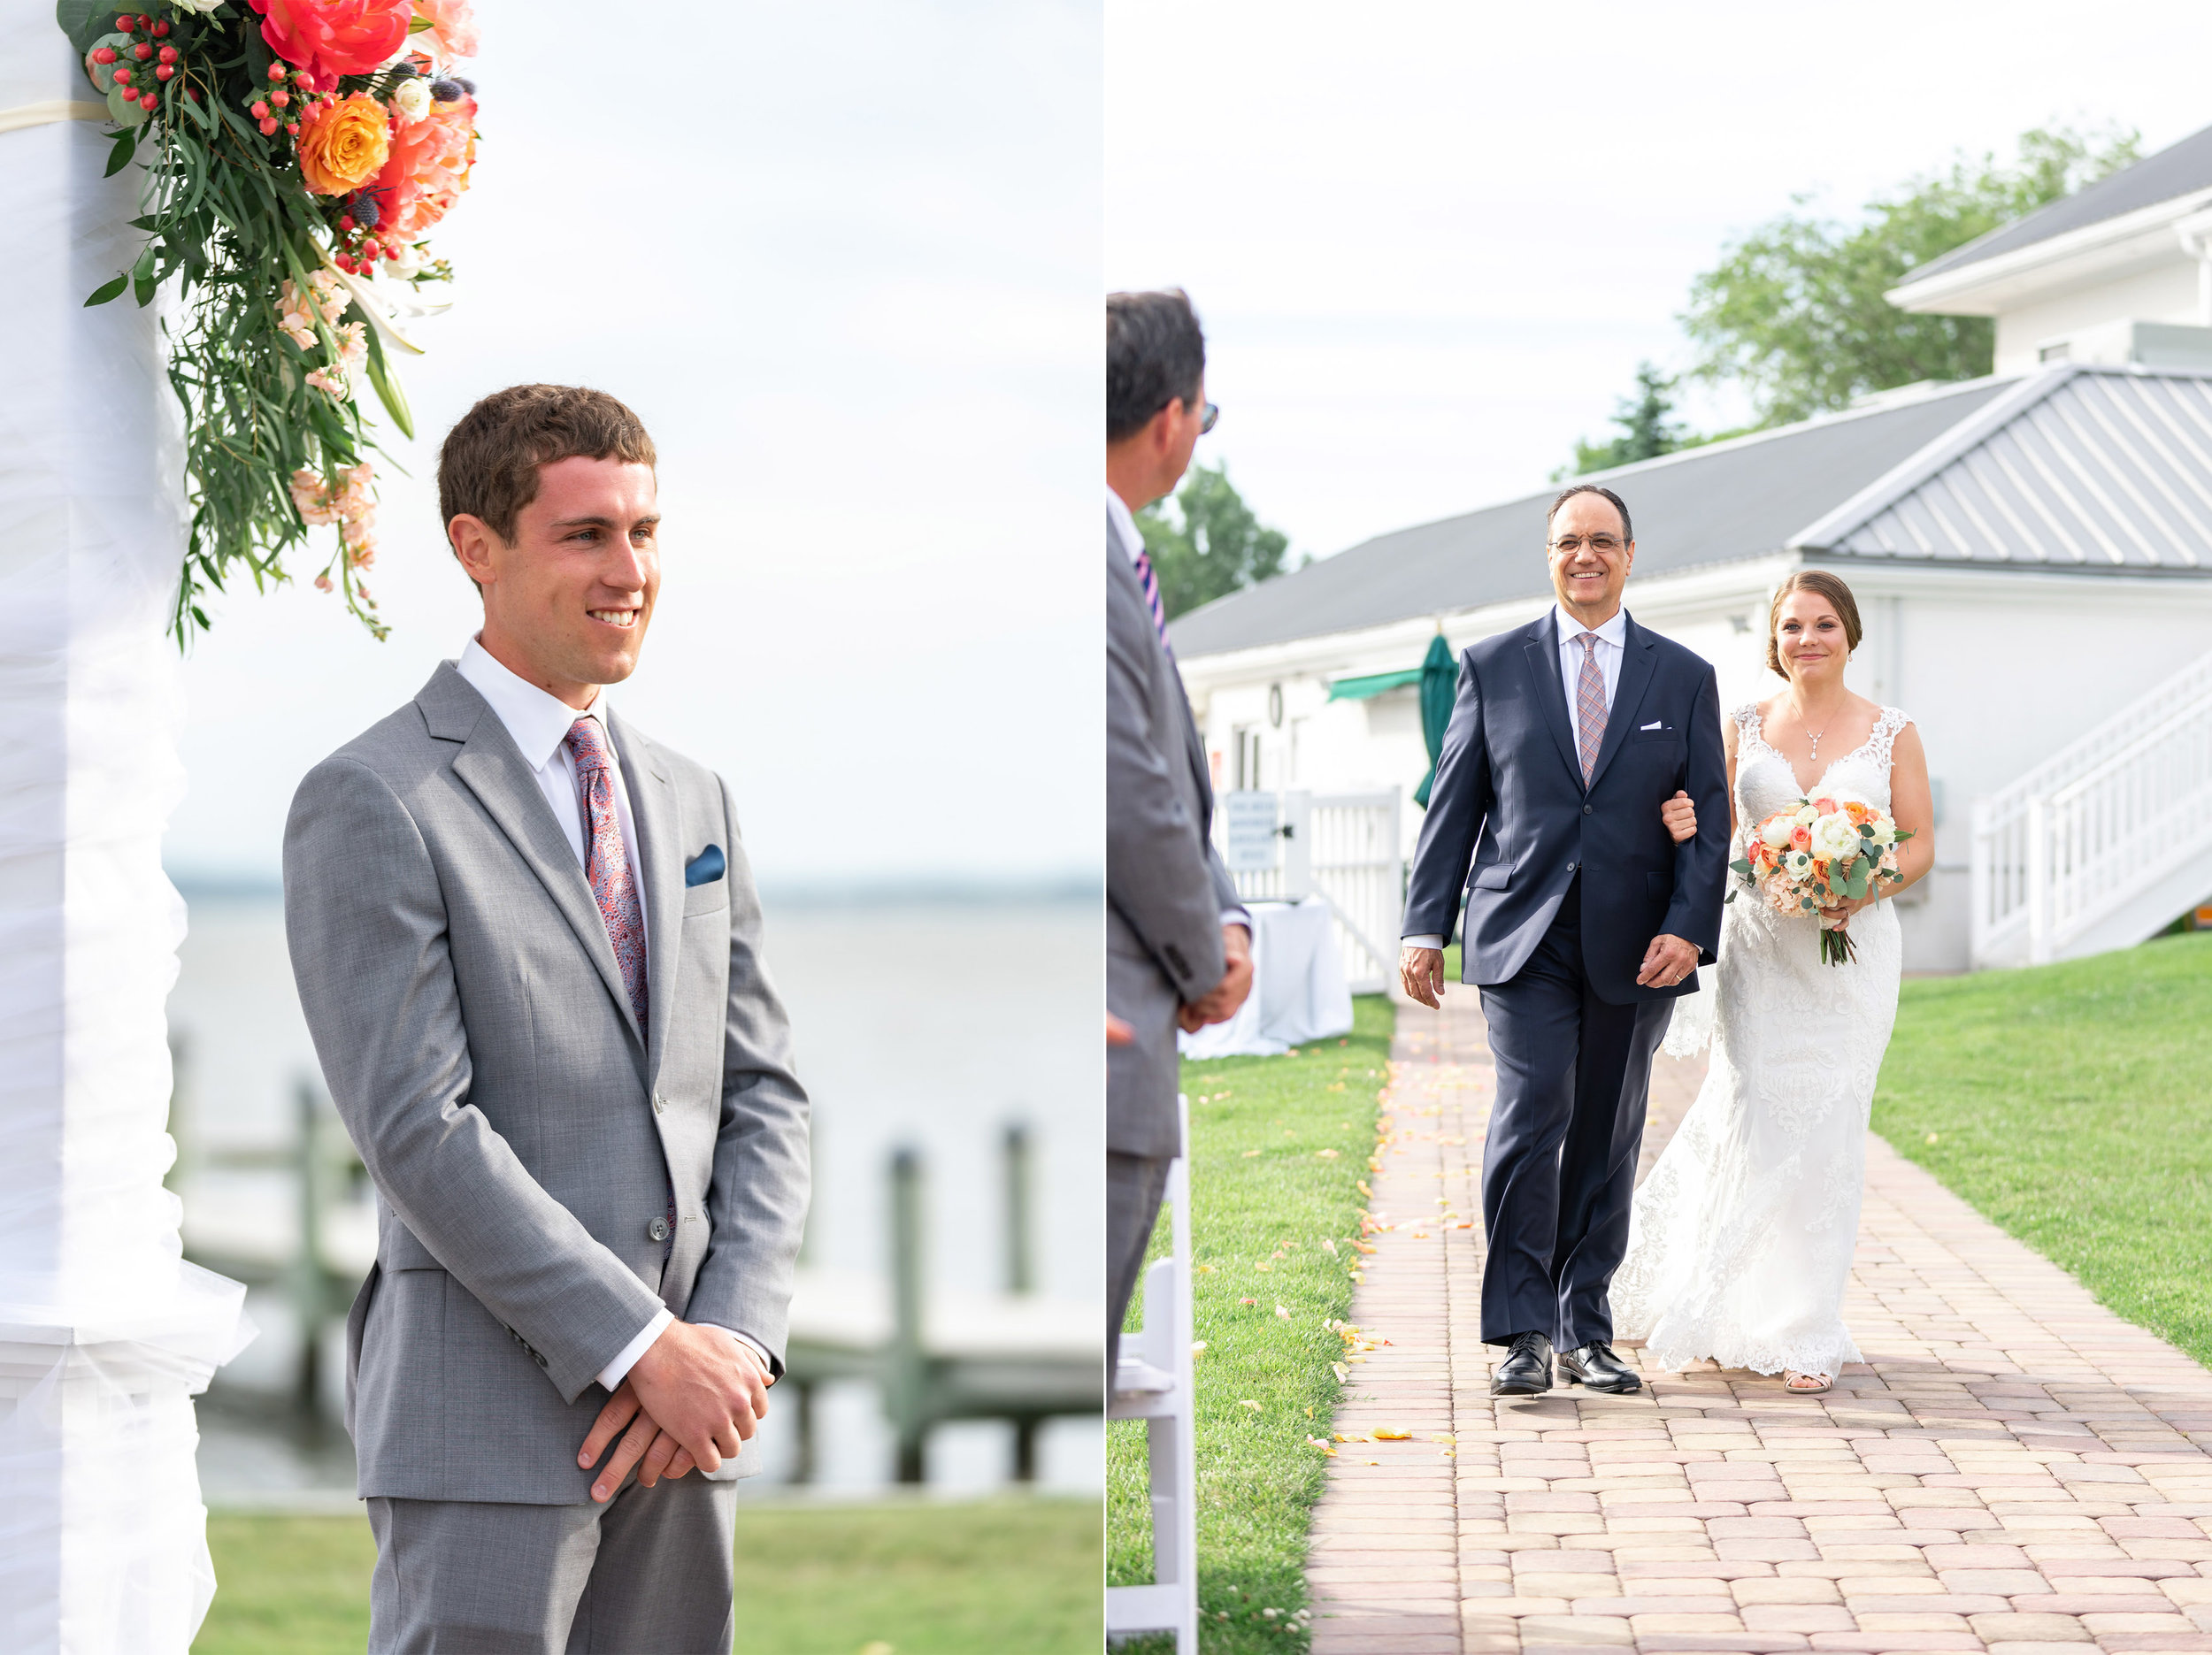 Groom watching bride come down the aisle at Rehoboth Beach Country Club